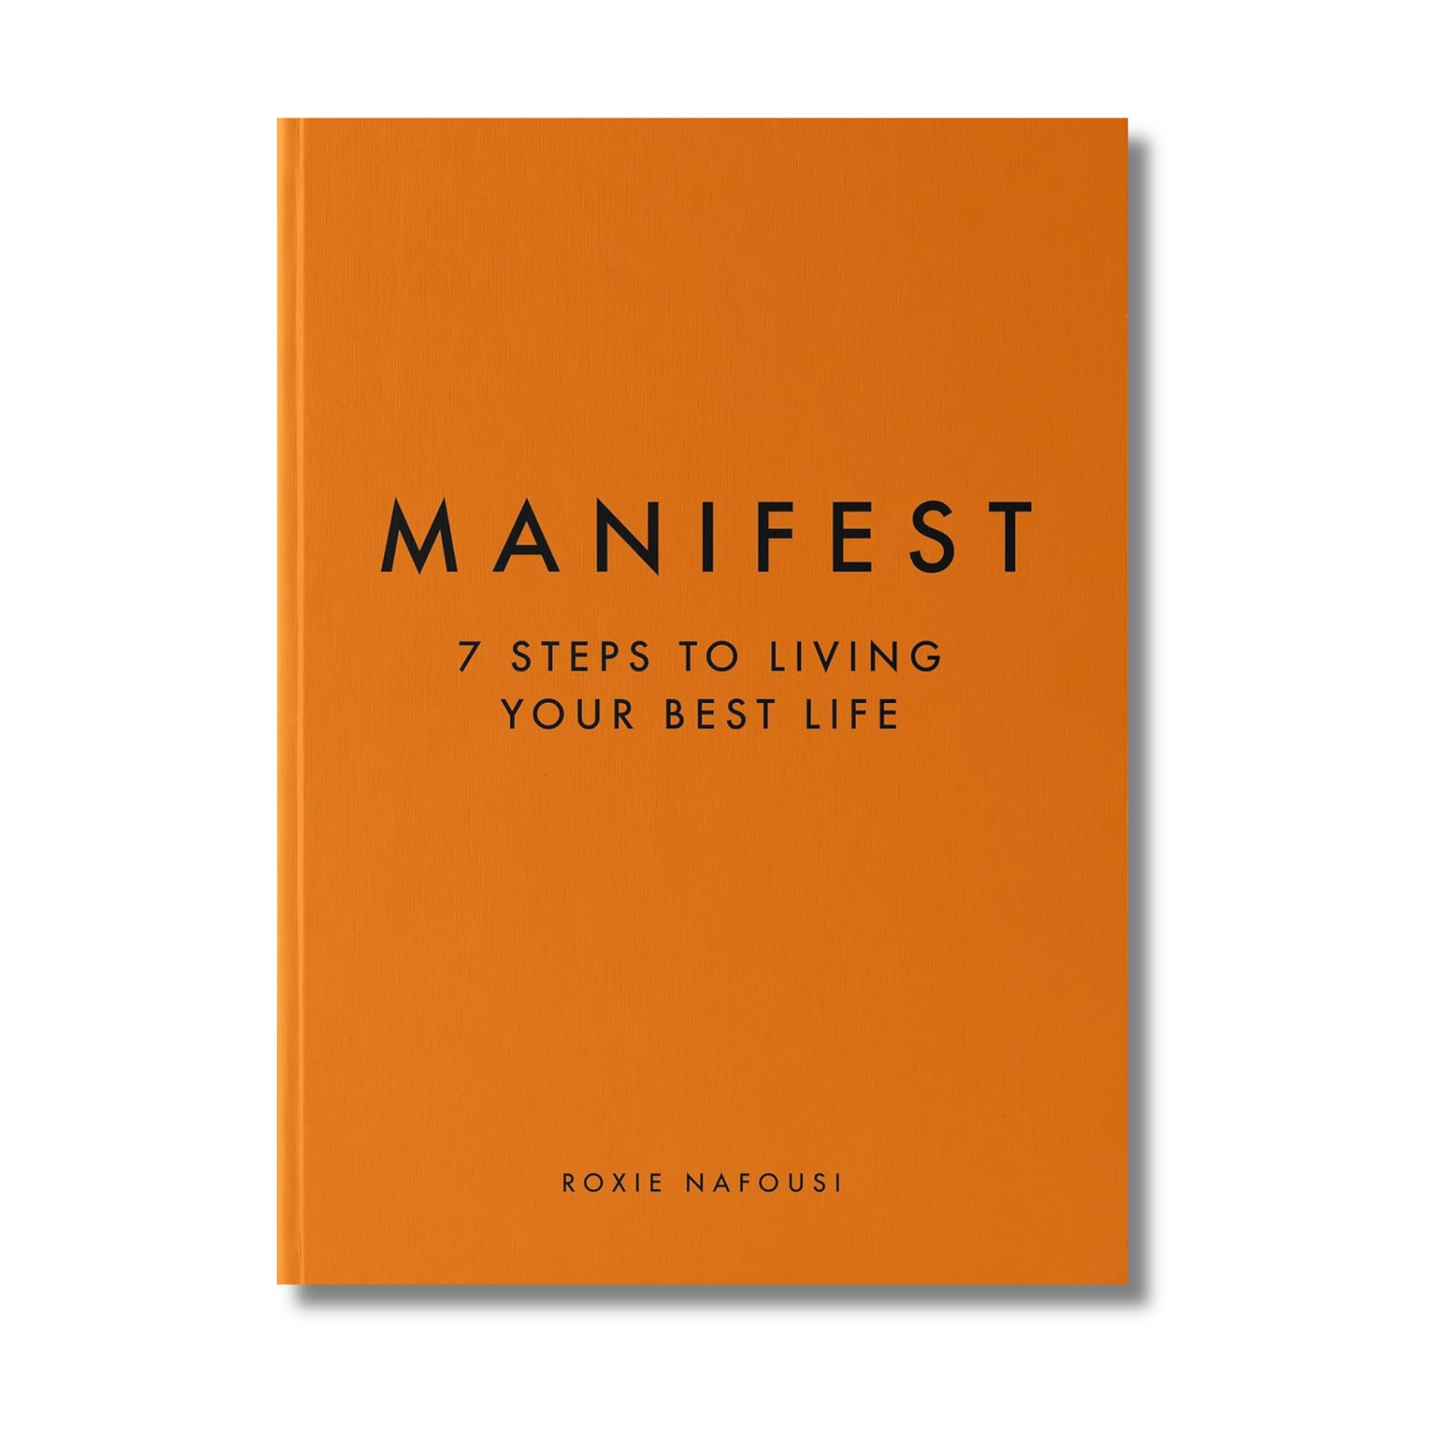 [Hardcover] Manifest: 7 Steps to living your best life by Roxie Nafousi